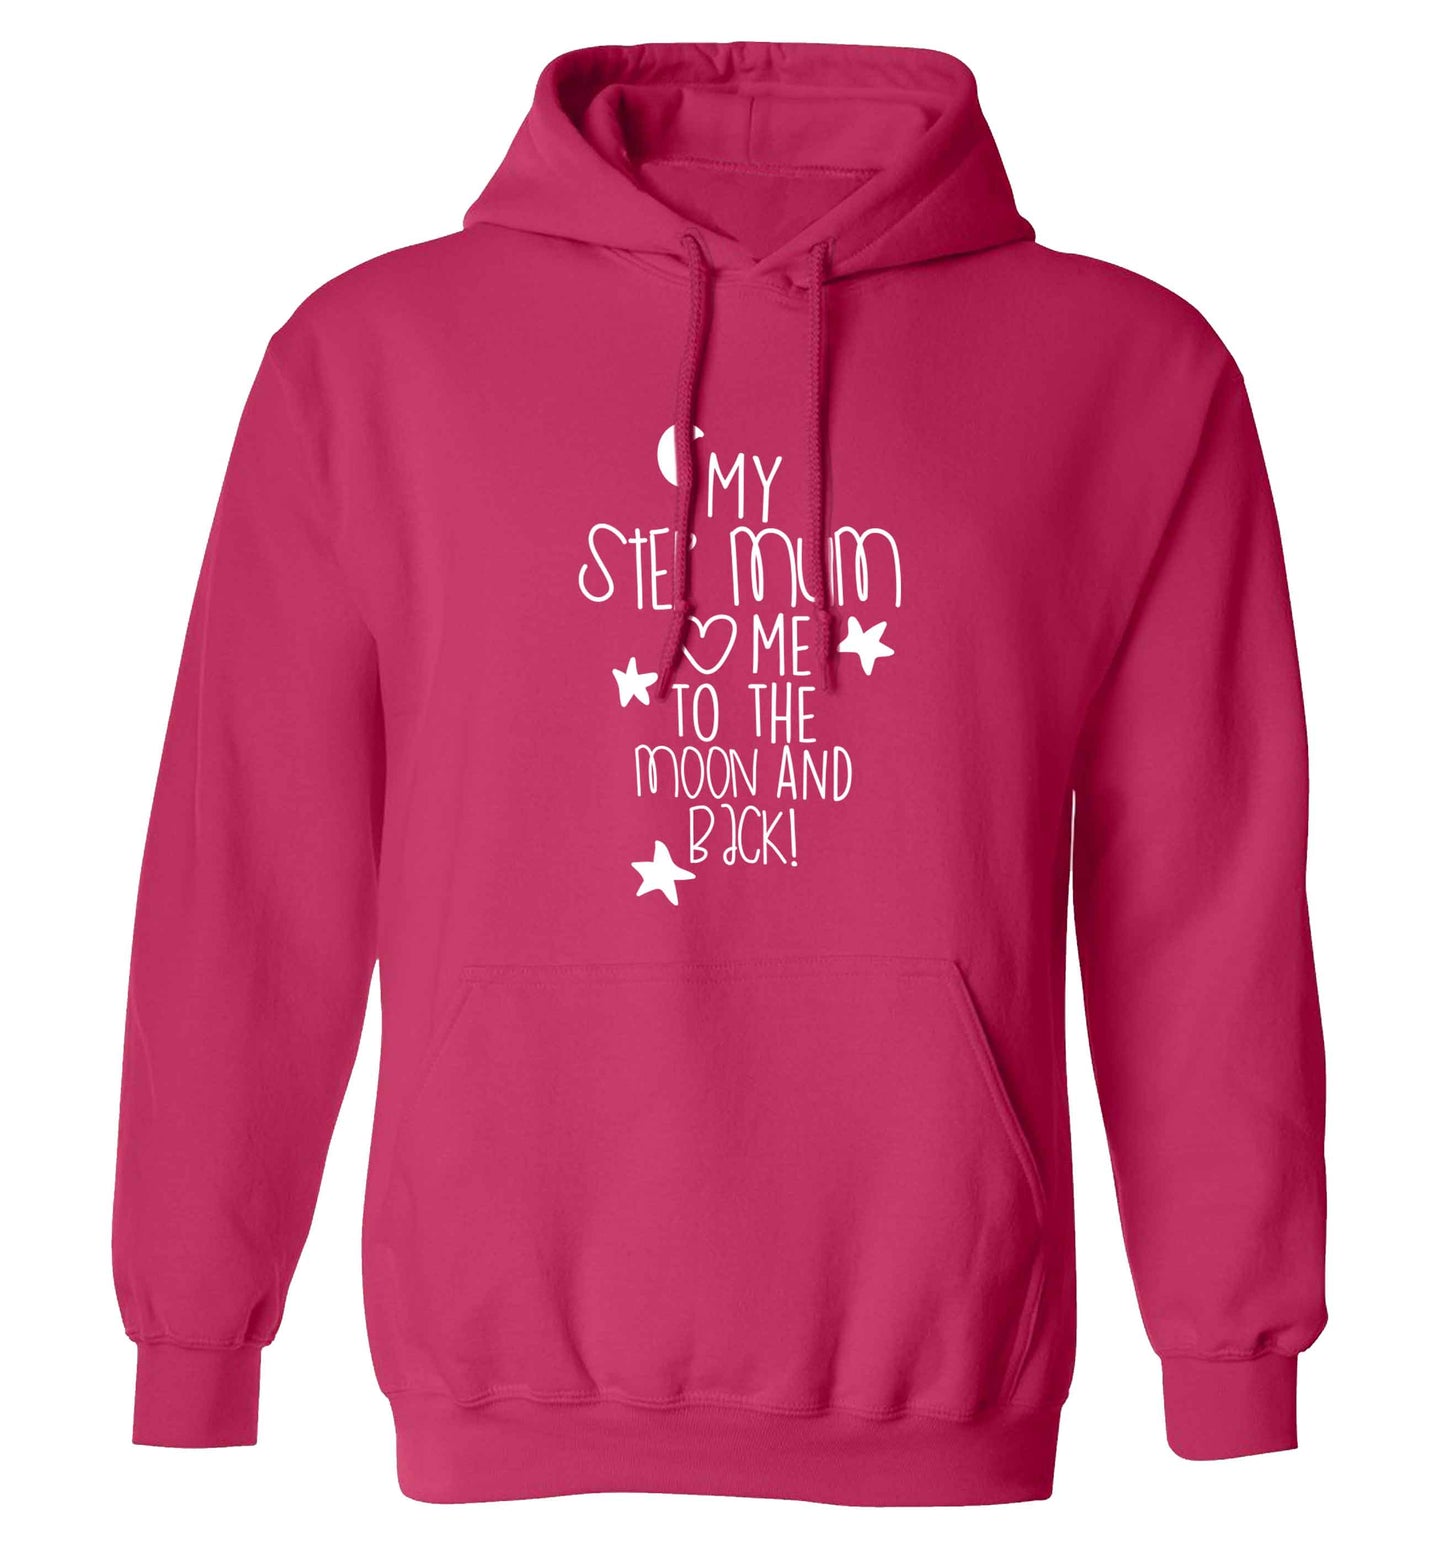 My step-mum loves me to the moon and back adults unisex pink hoodie 2XL